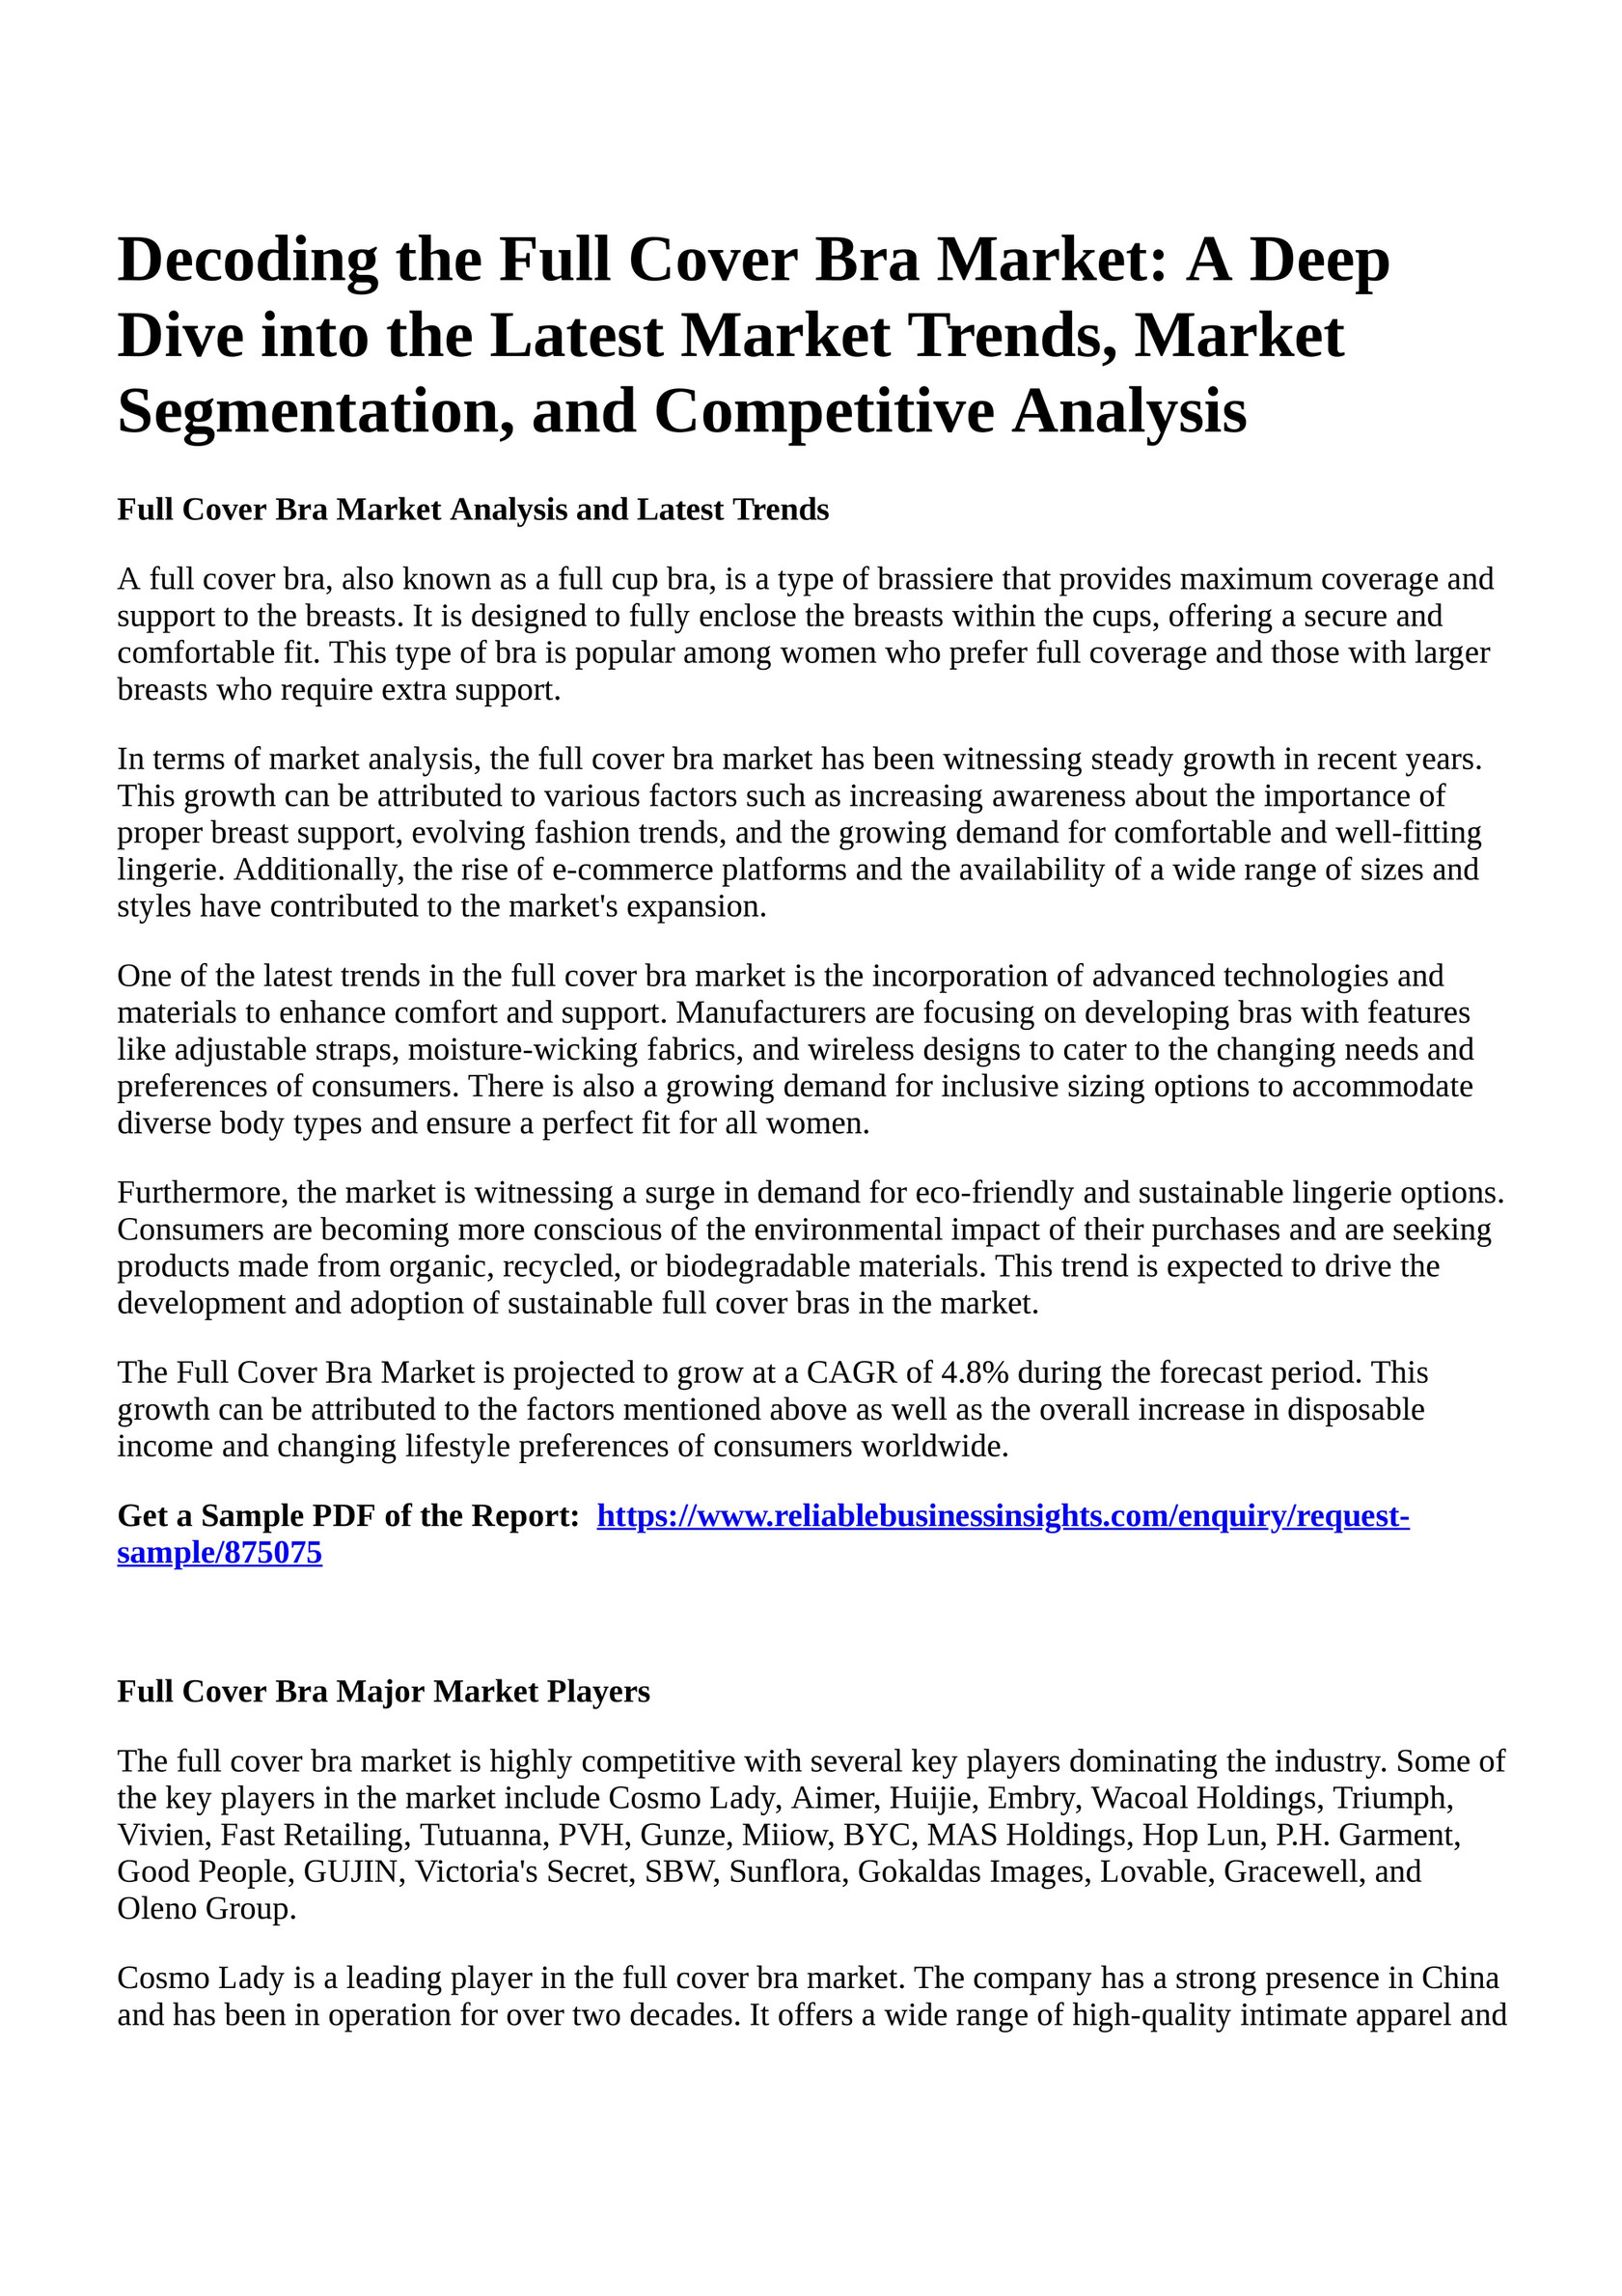 Reportprime - Decoding the Full Cover Bra Market: A Deep Dive into the  Latest Market Trends, Market Segmentation, and Competitive Analysis - Page 1